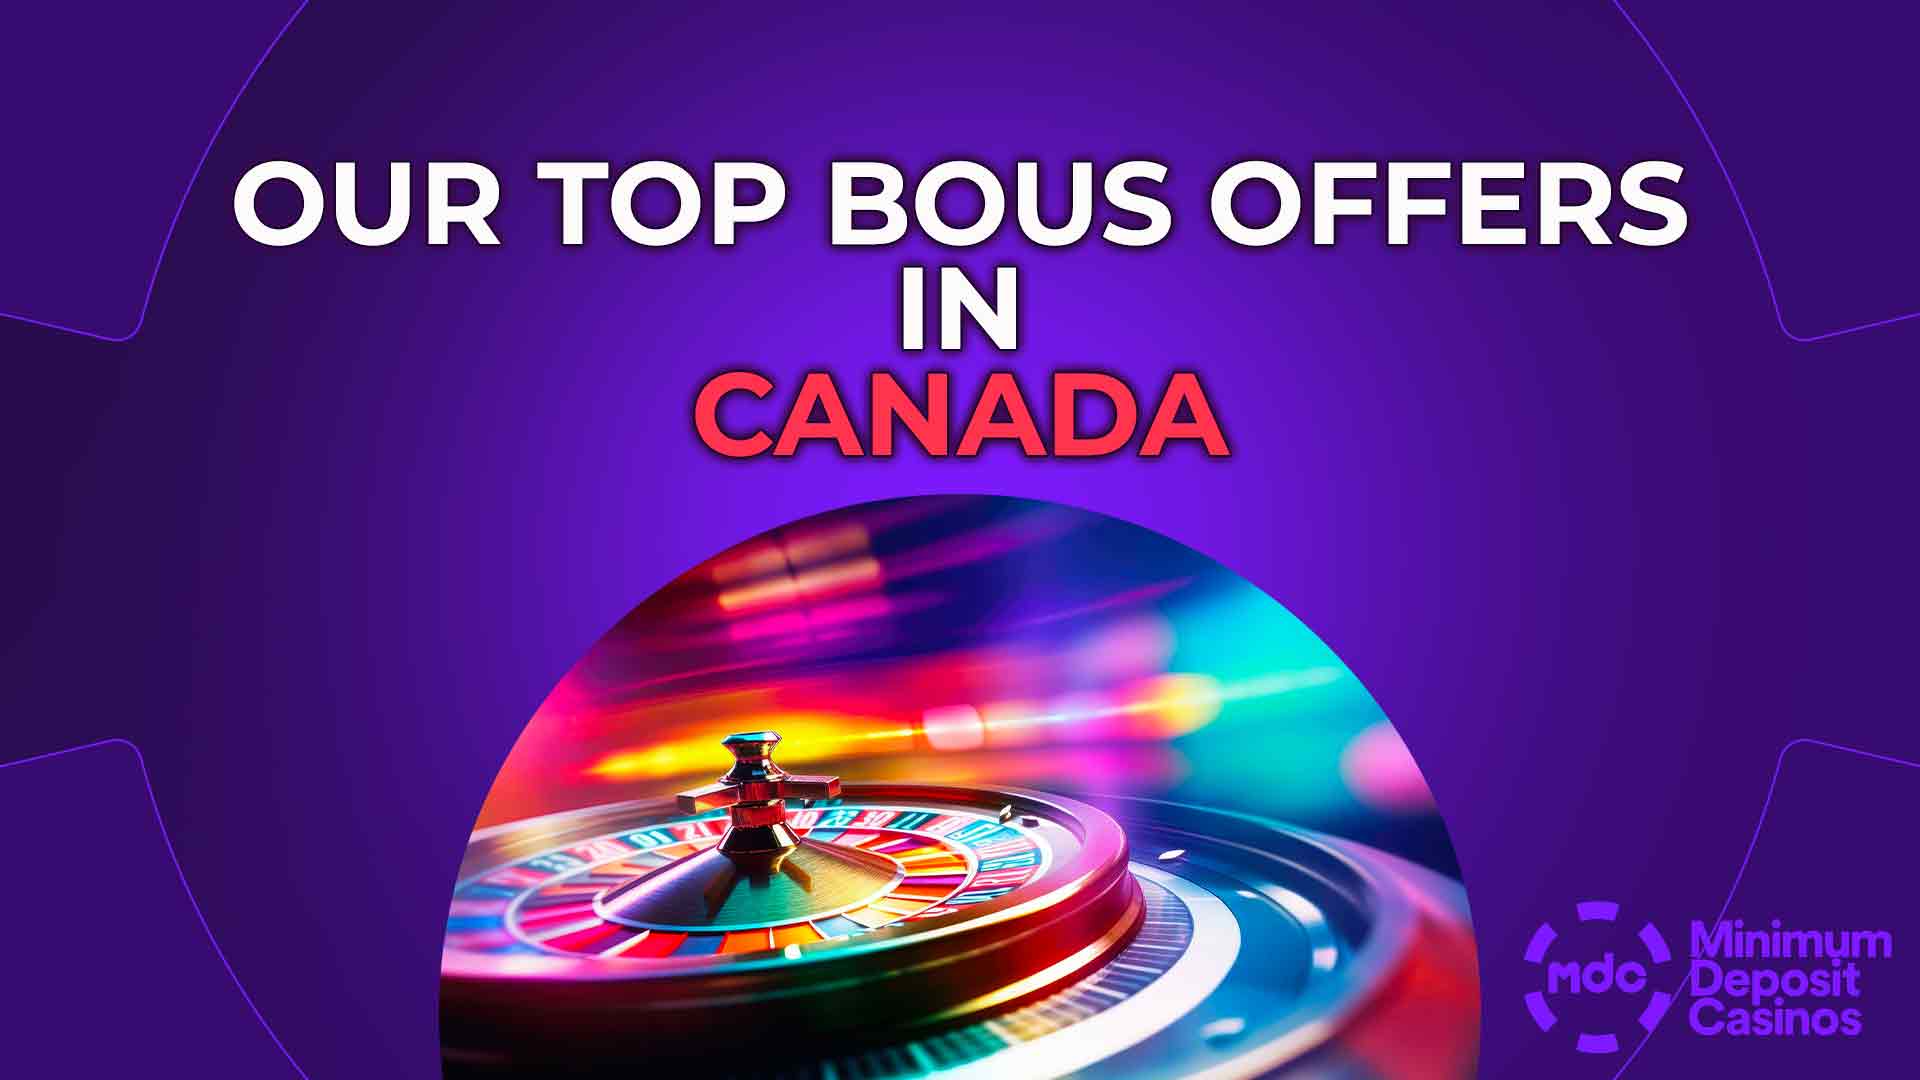 OUR TOP PICKS FOR BONUS OFFERS IN CANADA